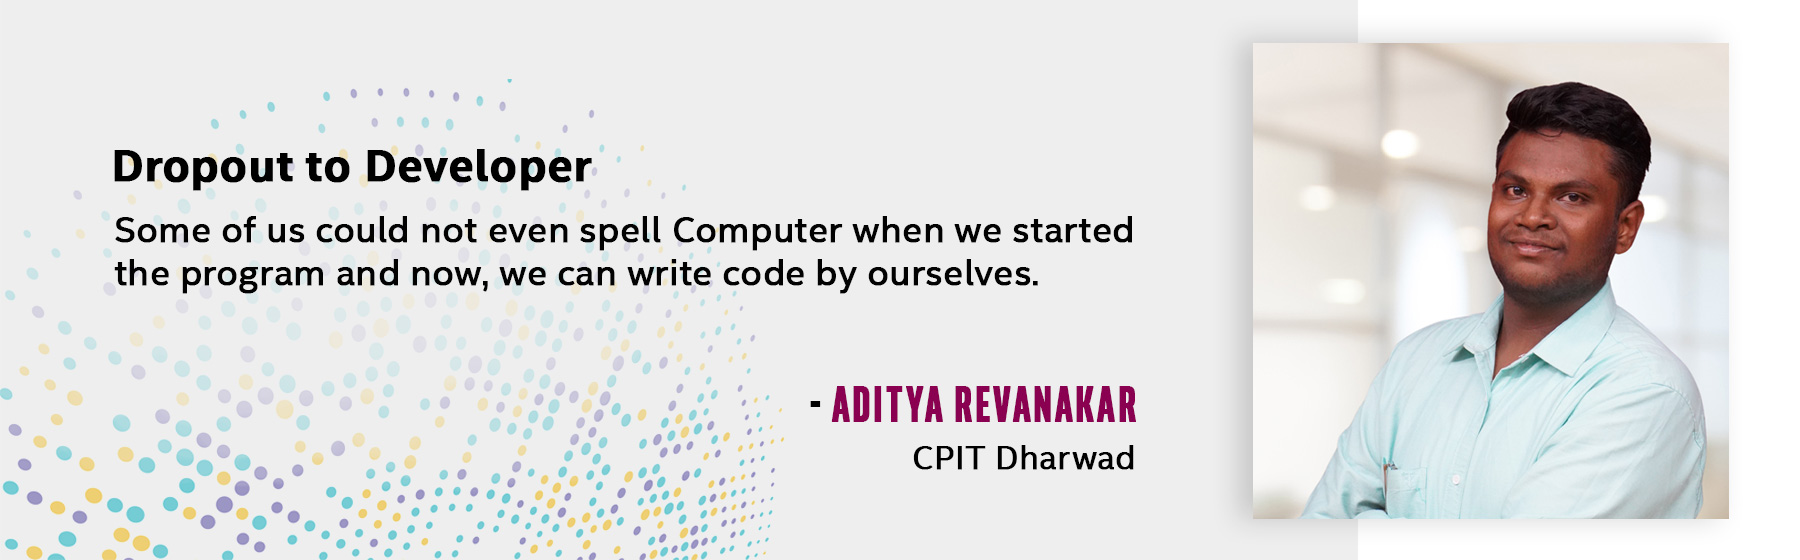 Some of us could not even spell Computer when we started the program and now, we can write code by ourselves